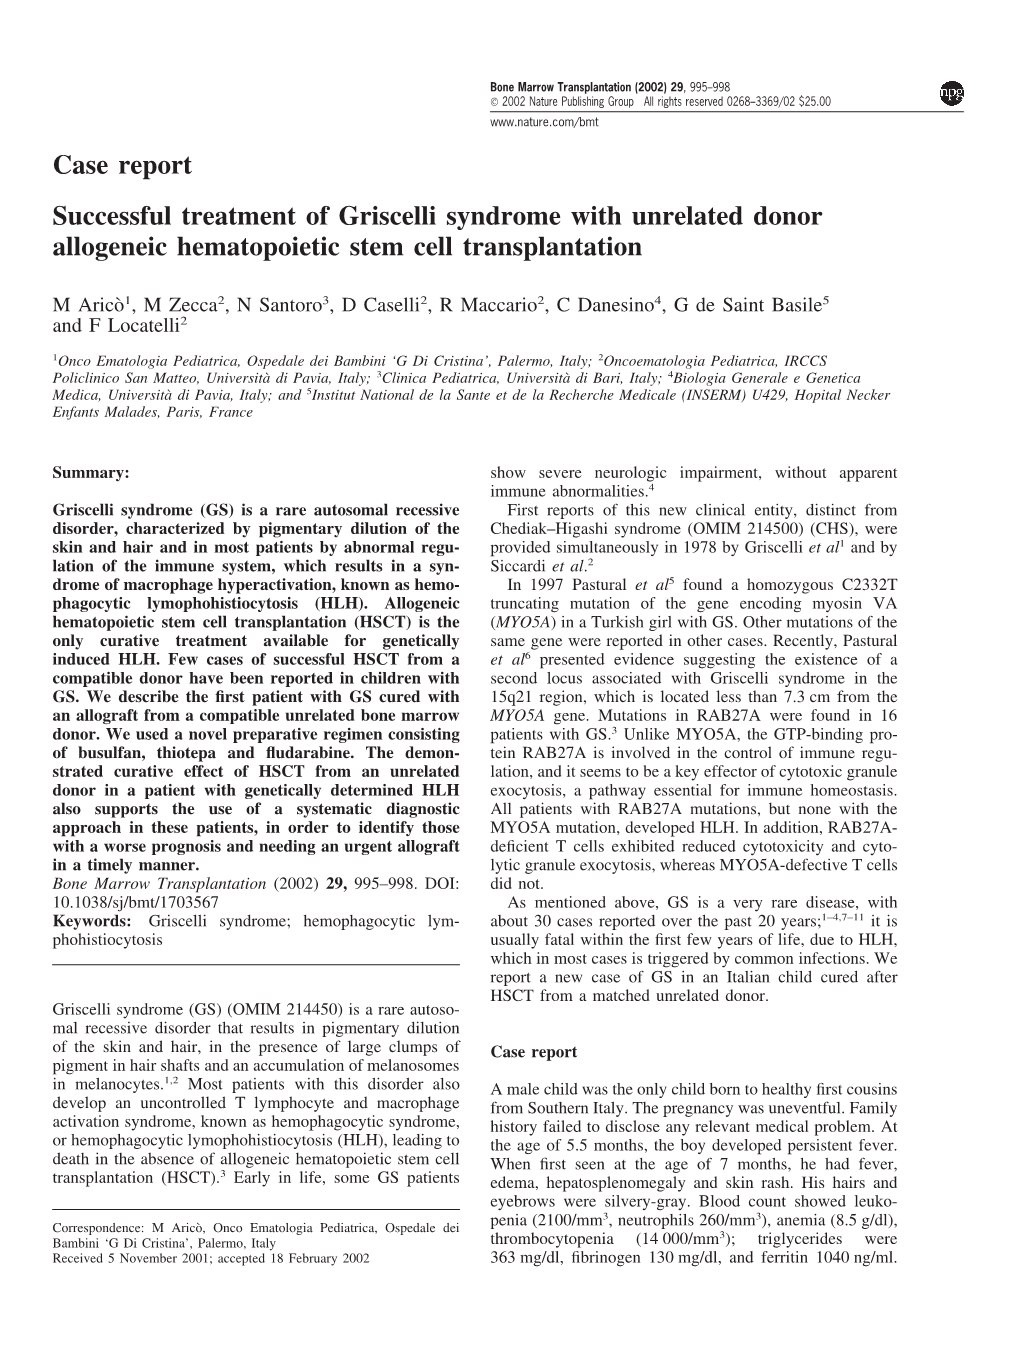 Case Report Successful Treatment of Griscelli Syndrome with Unrelated Donor Allogeneic Hematopoietic Stem Cell Transplantation